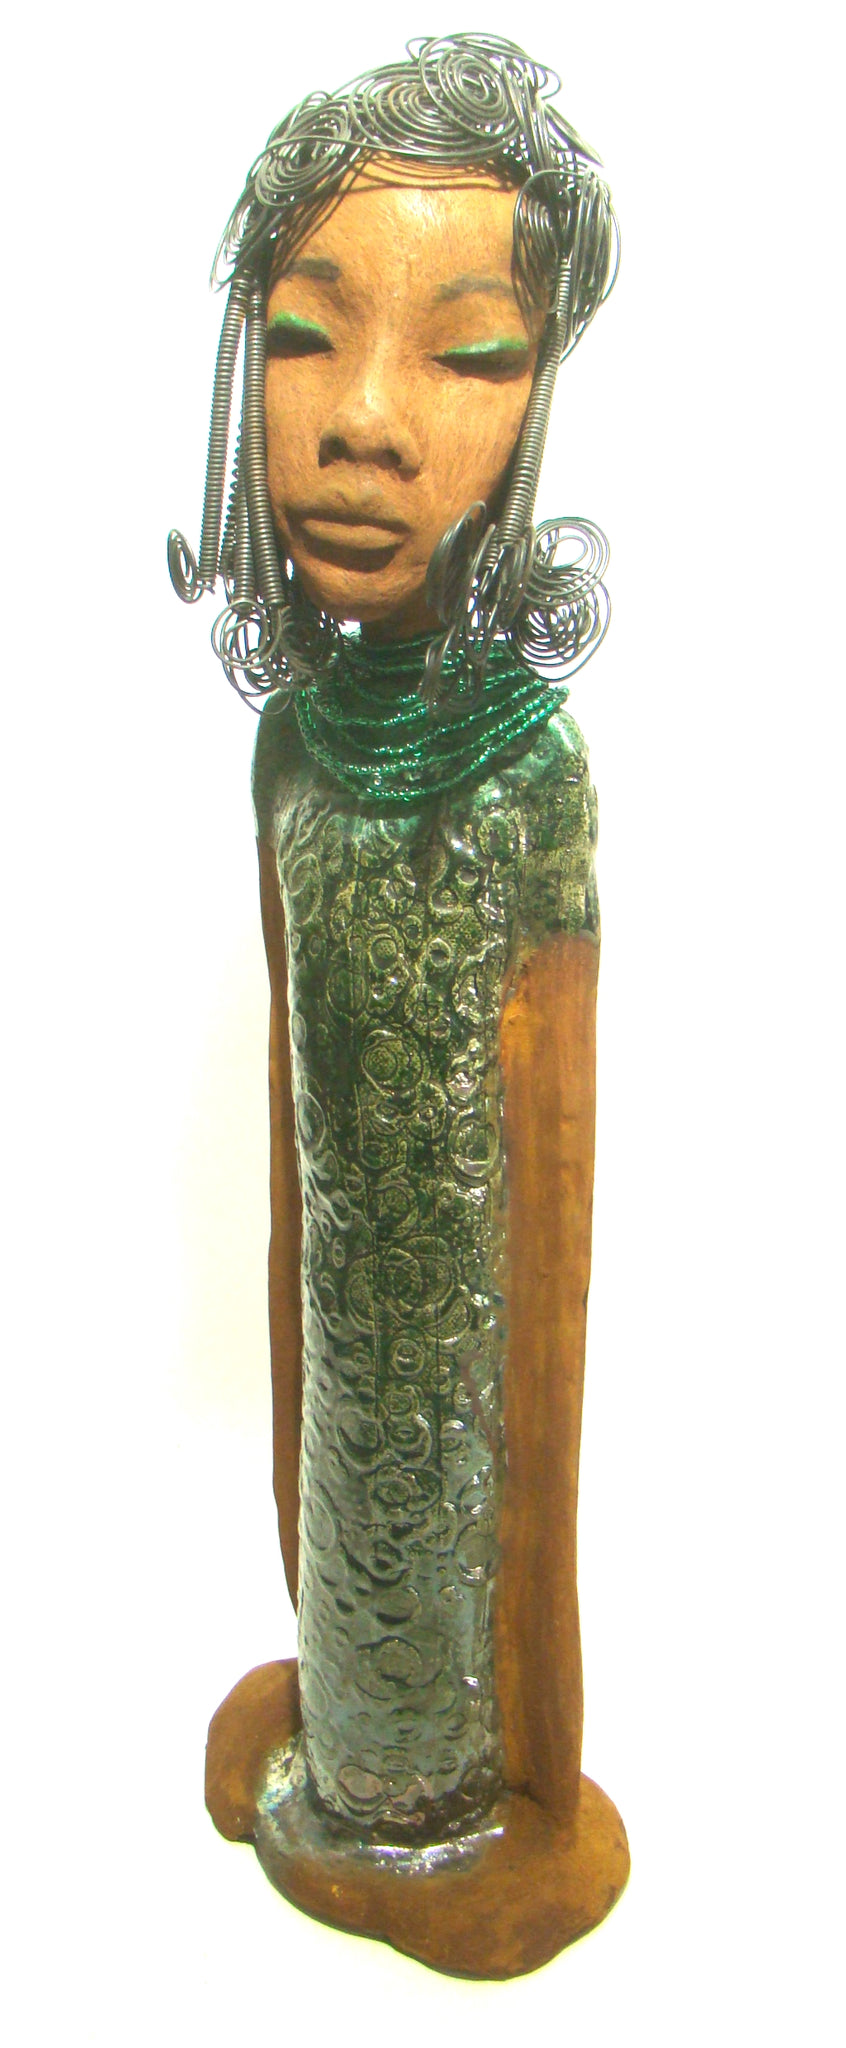 Felicia stands 25" x 8" x 6". and weighs 8.14 Lbs. She has a honey brown complexion with with over 40 feet of fancy wire hair. Felicia dress is textured alligator green. She wears emerald green bead. She really does have a sweet face.